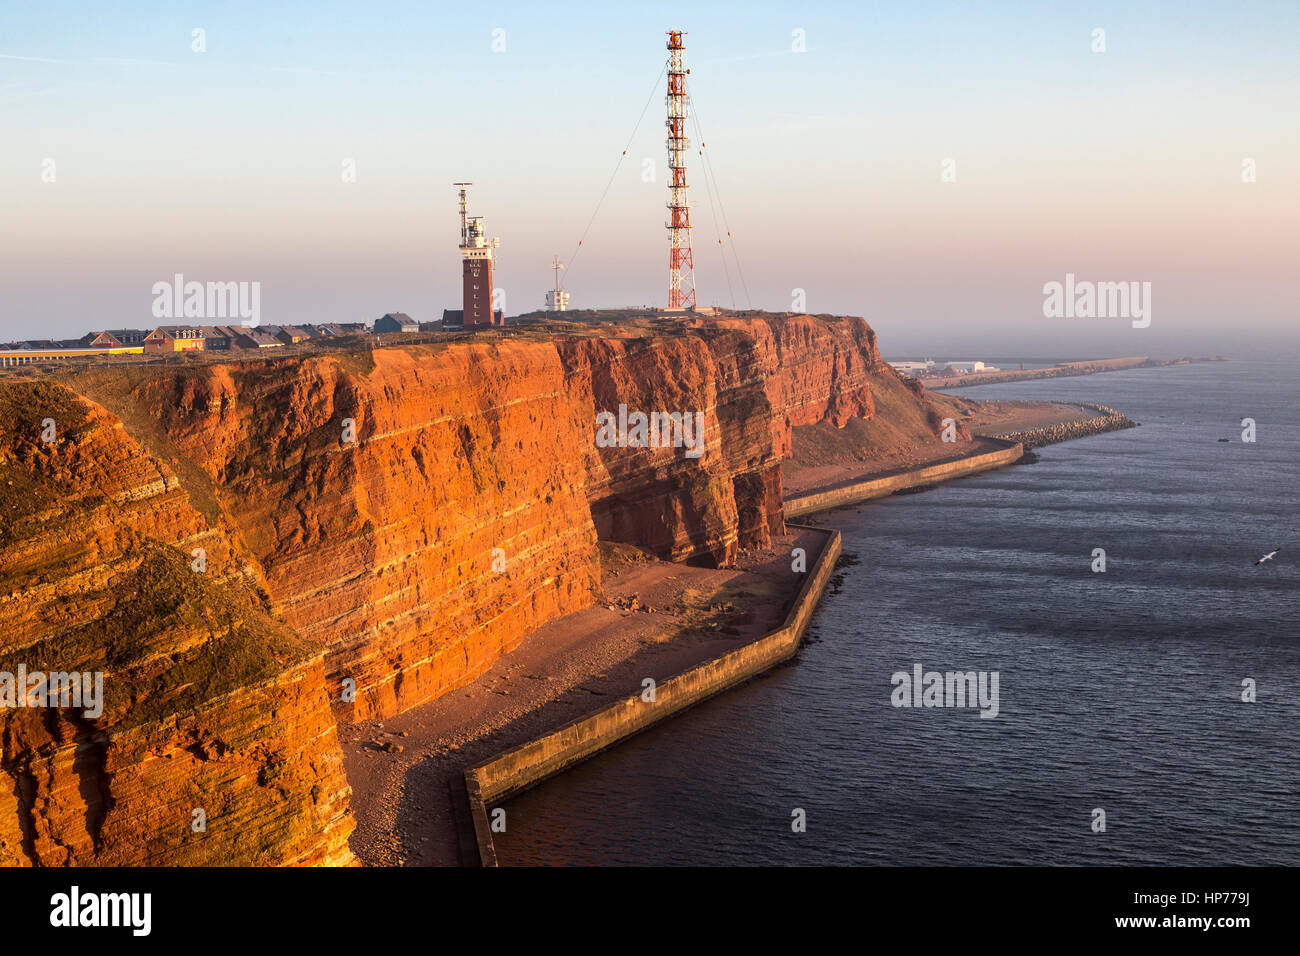 The red steep coast line of Helgoland, an German Island in the North Sea, lighthouse and radio-relay system antenna mast, Stock Photo